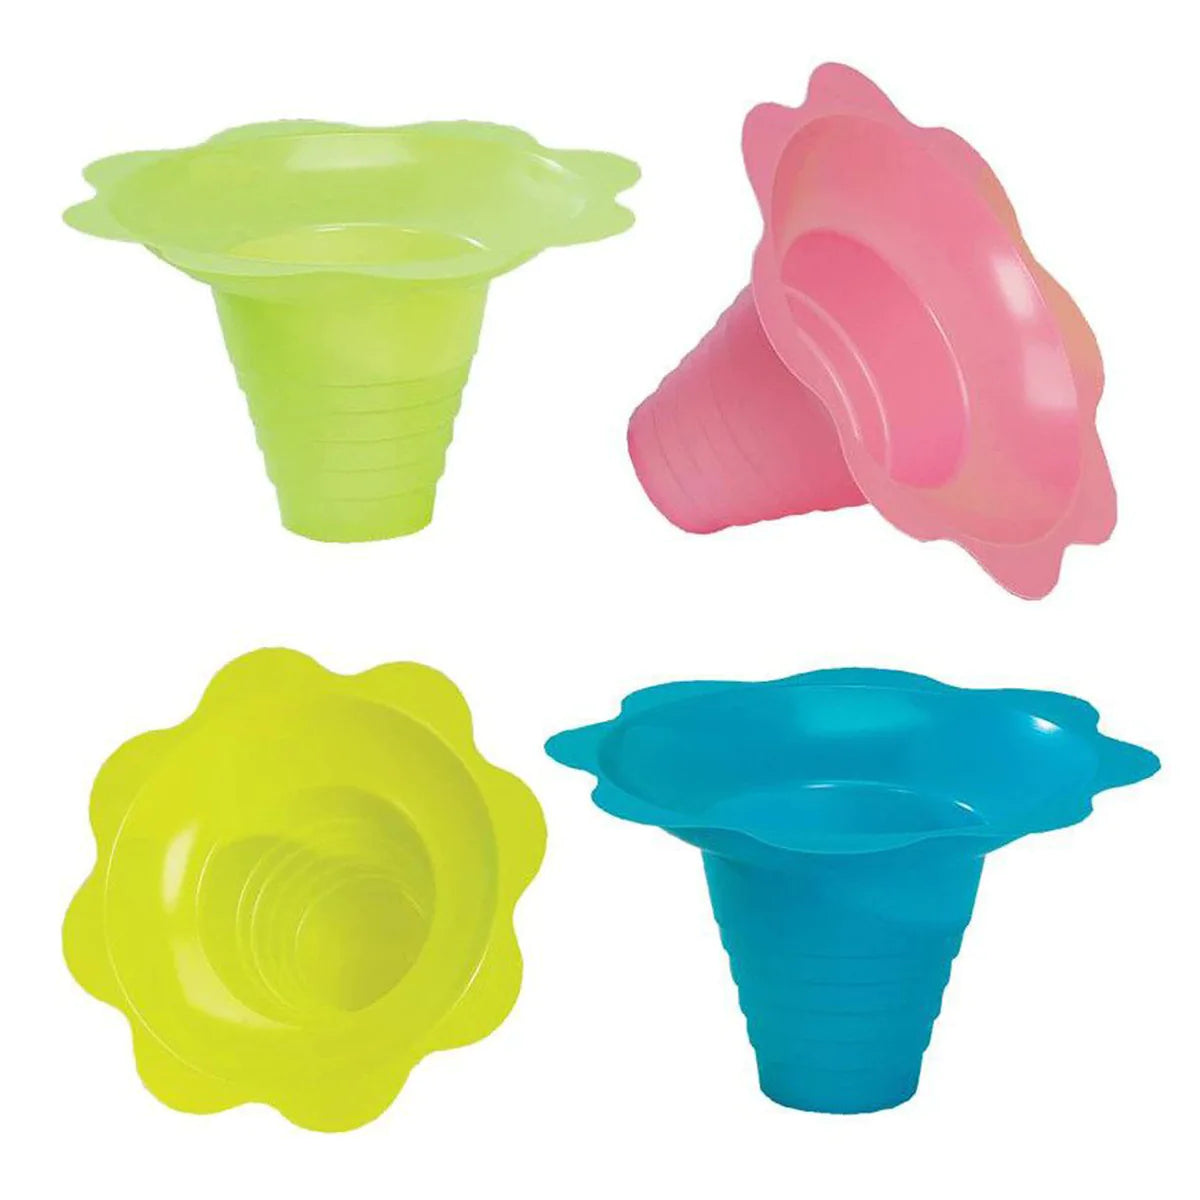 Large Flower shaped snow cone cups